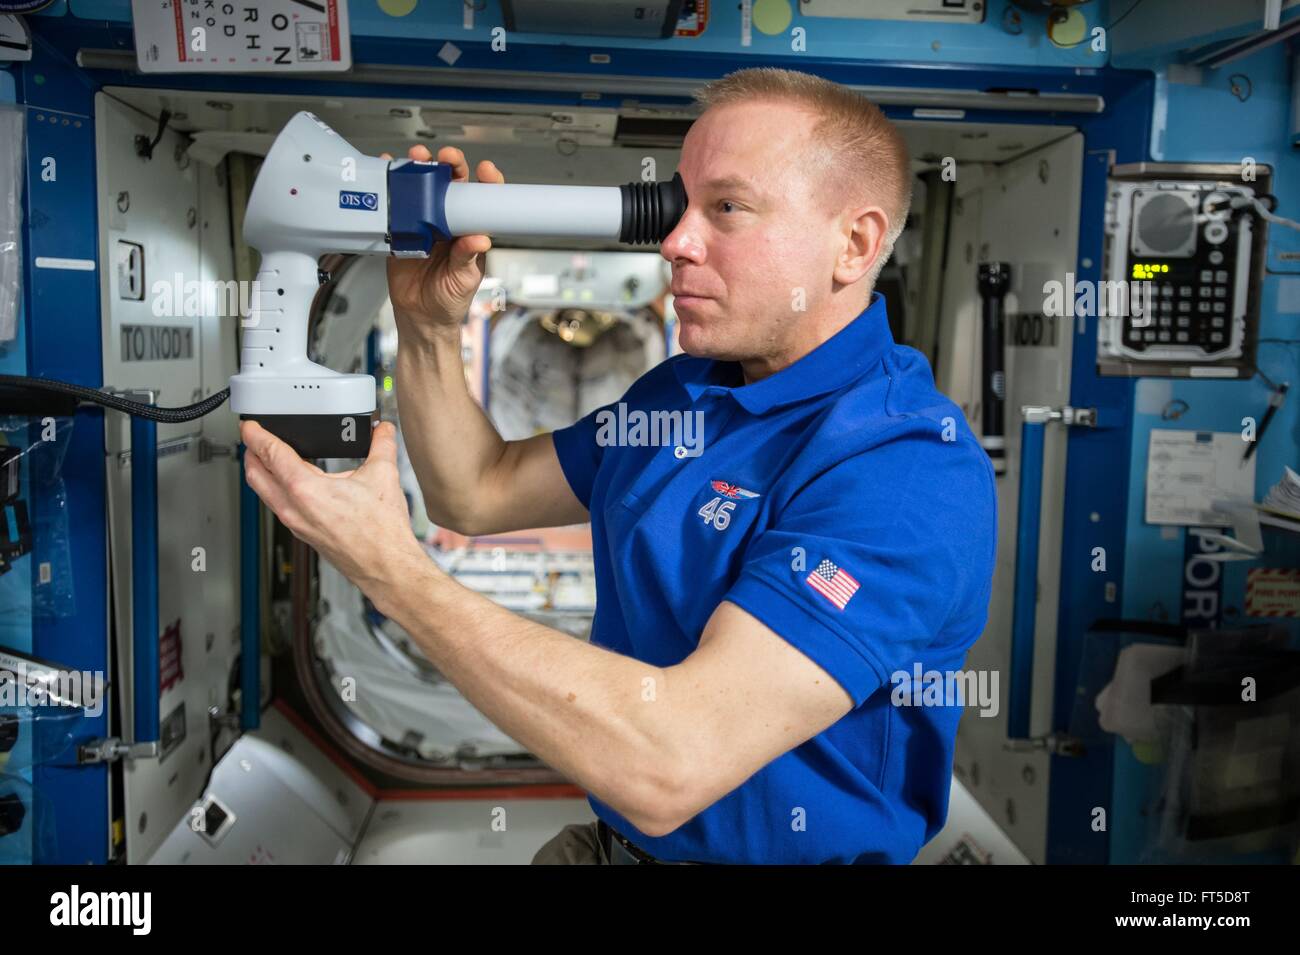 NASA astronaut Tim Kopra participates in the Ocular Health investigation aboard the International Space Station March 16, 2016 in Earth Orbit. The study seeks to better understand how weightlessness effects vision. Stock Photo